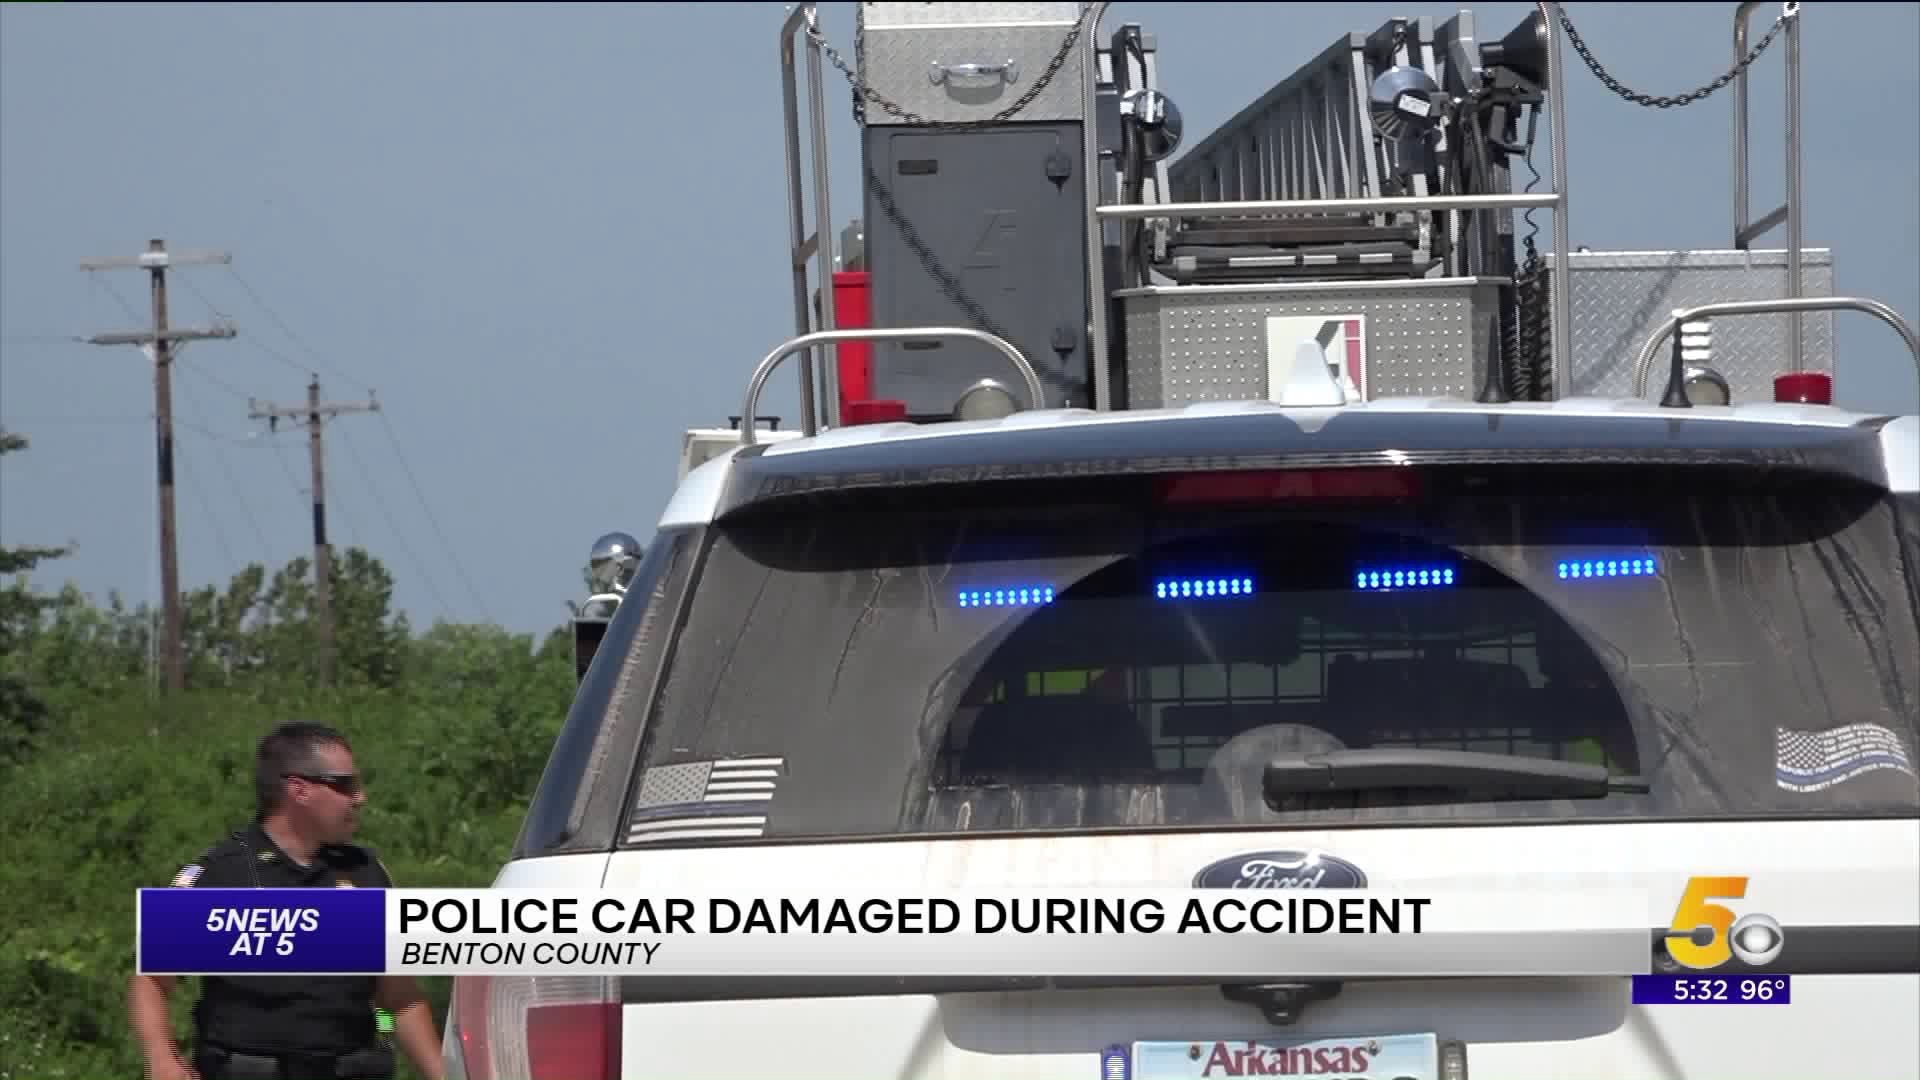 Police Car Damaged During Accident